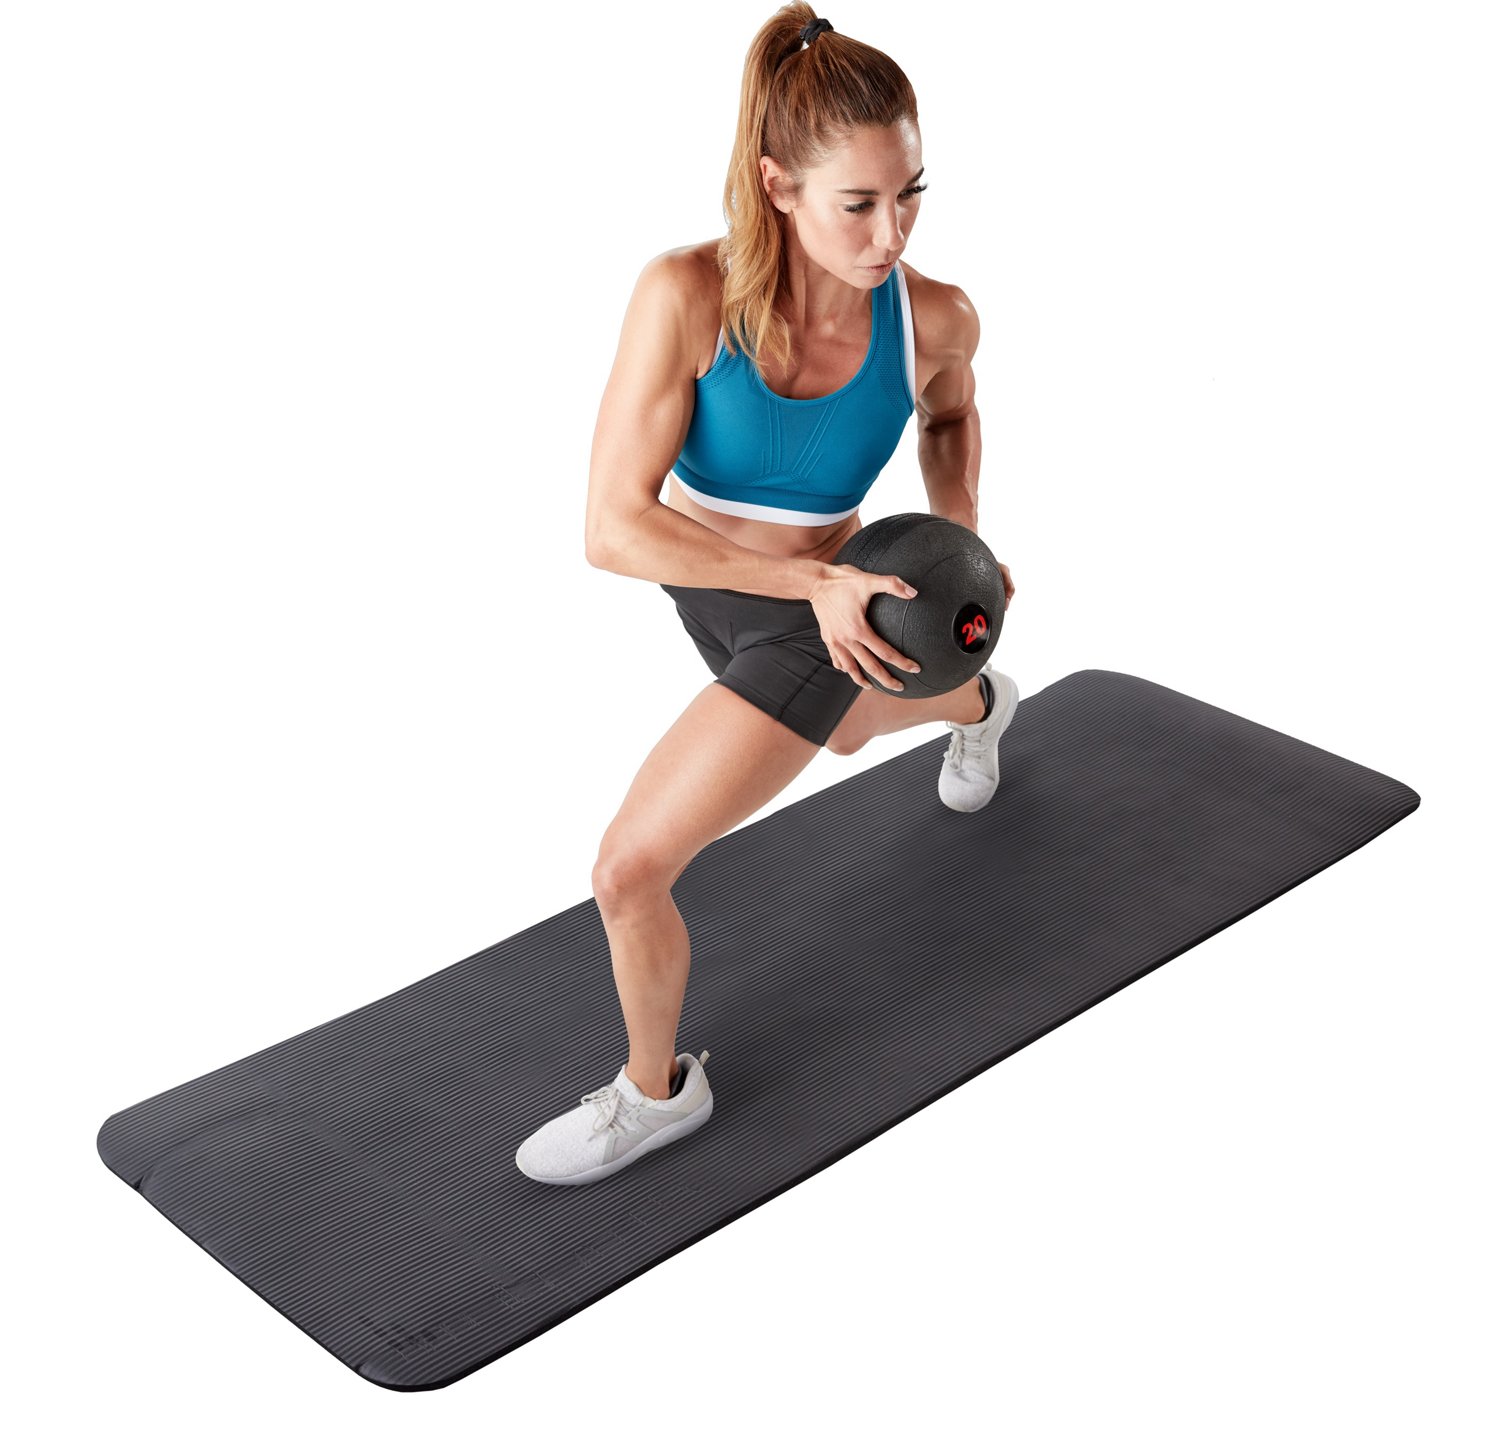 Fitness Mats | Gym, Exercise, \u0026 Workout 